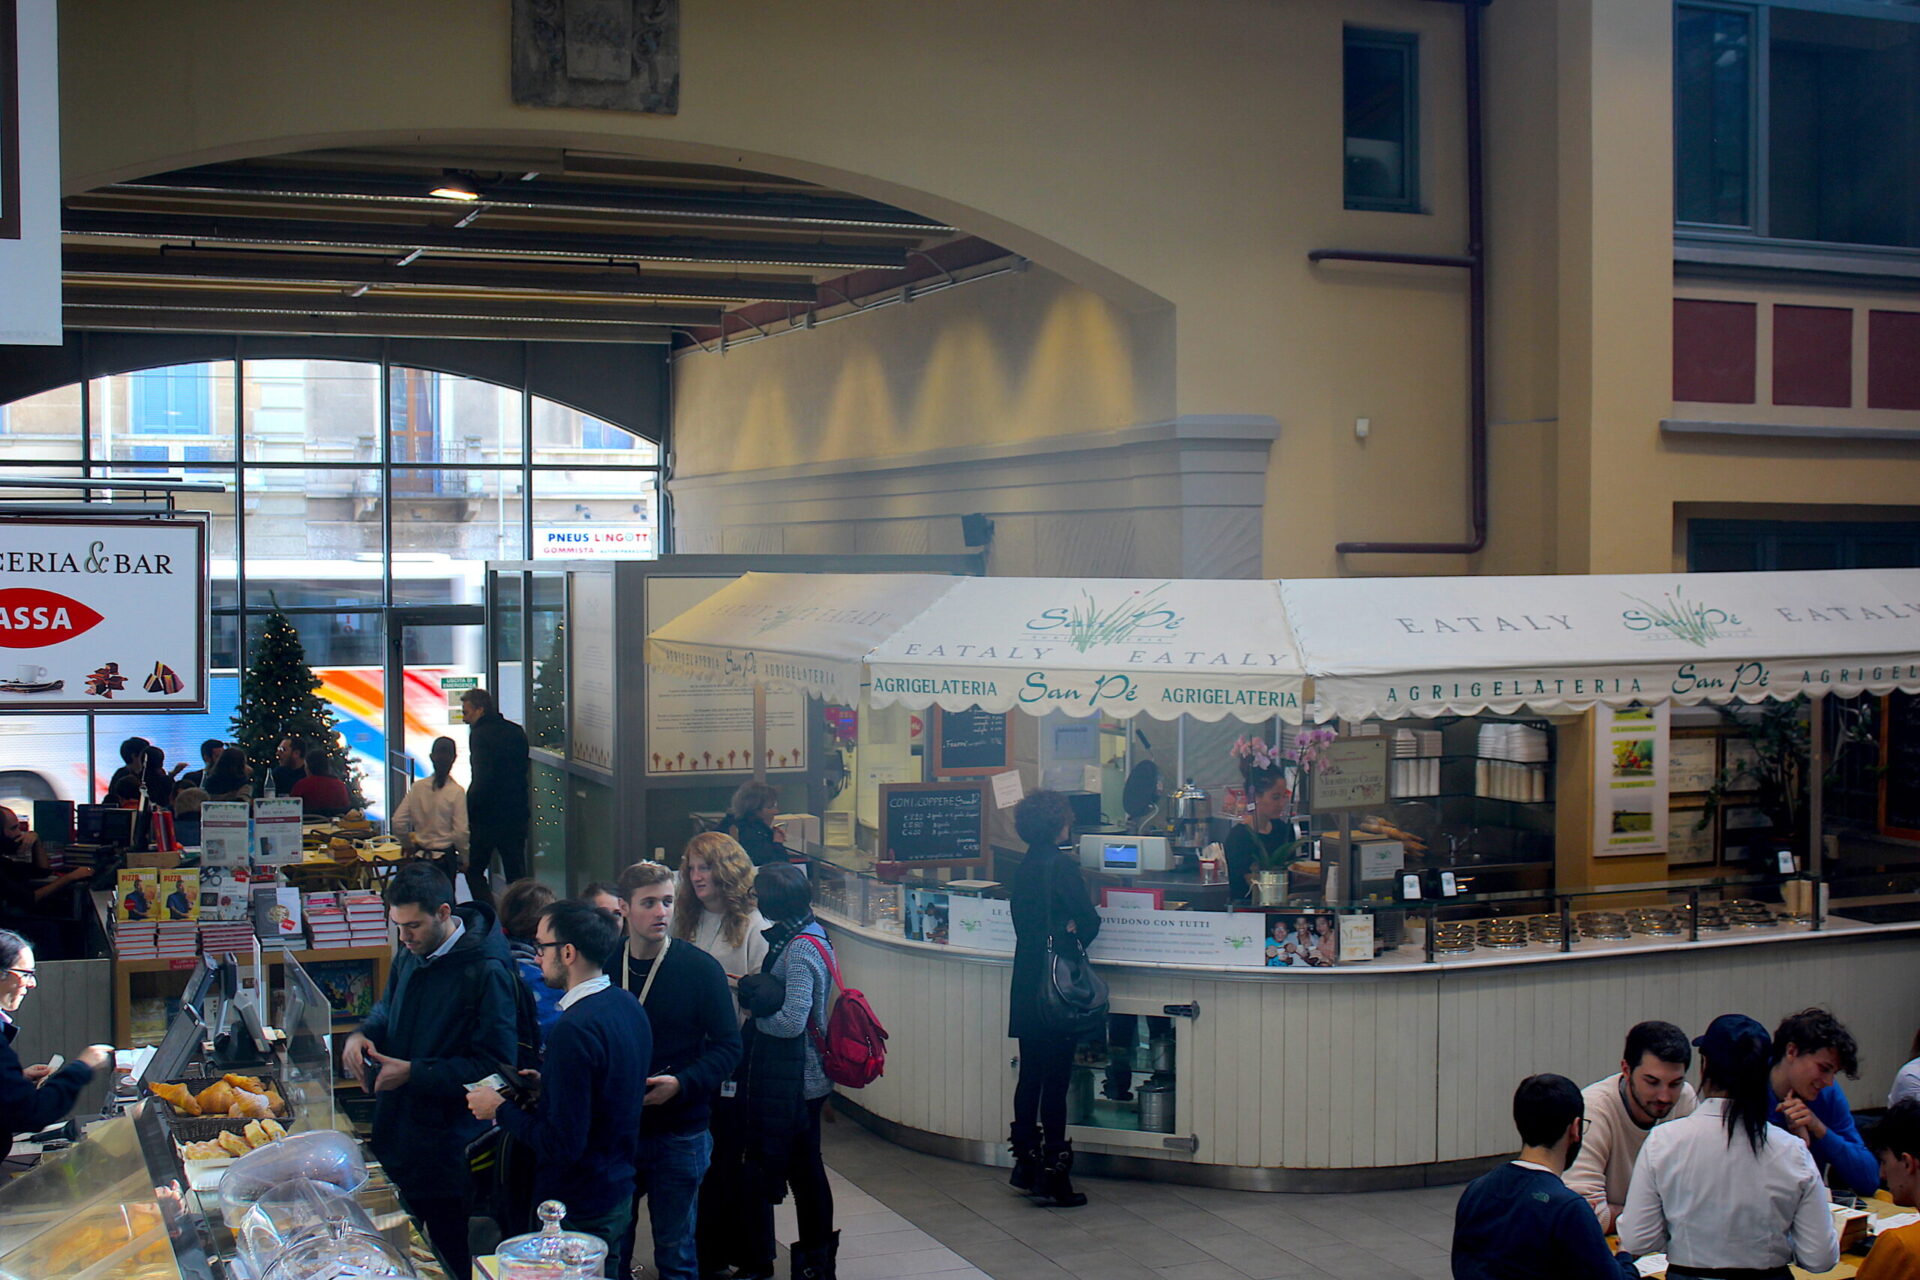 Lunch crowds at indoor food marketing in Piemonte Italy